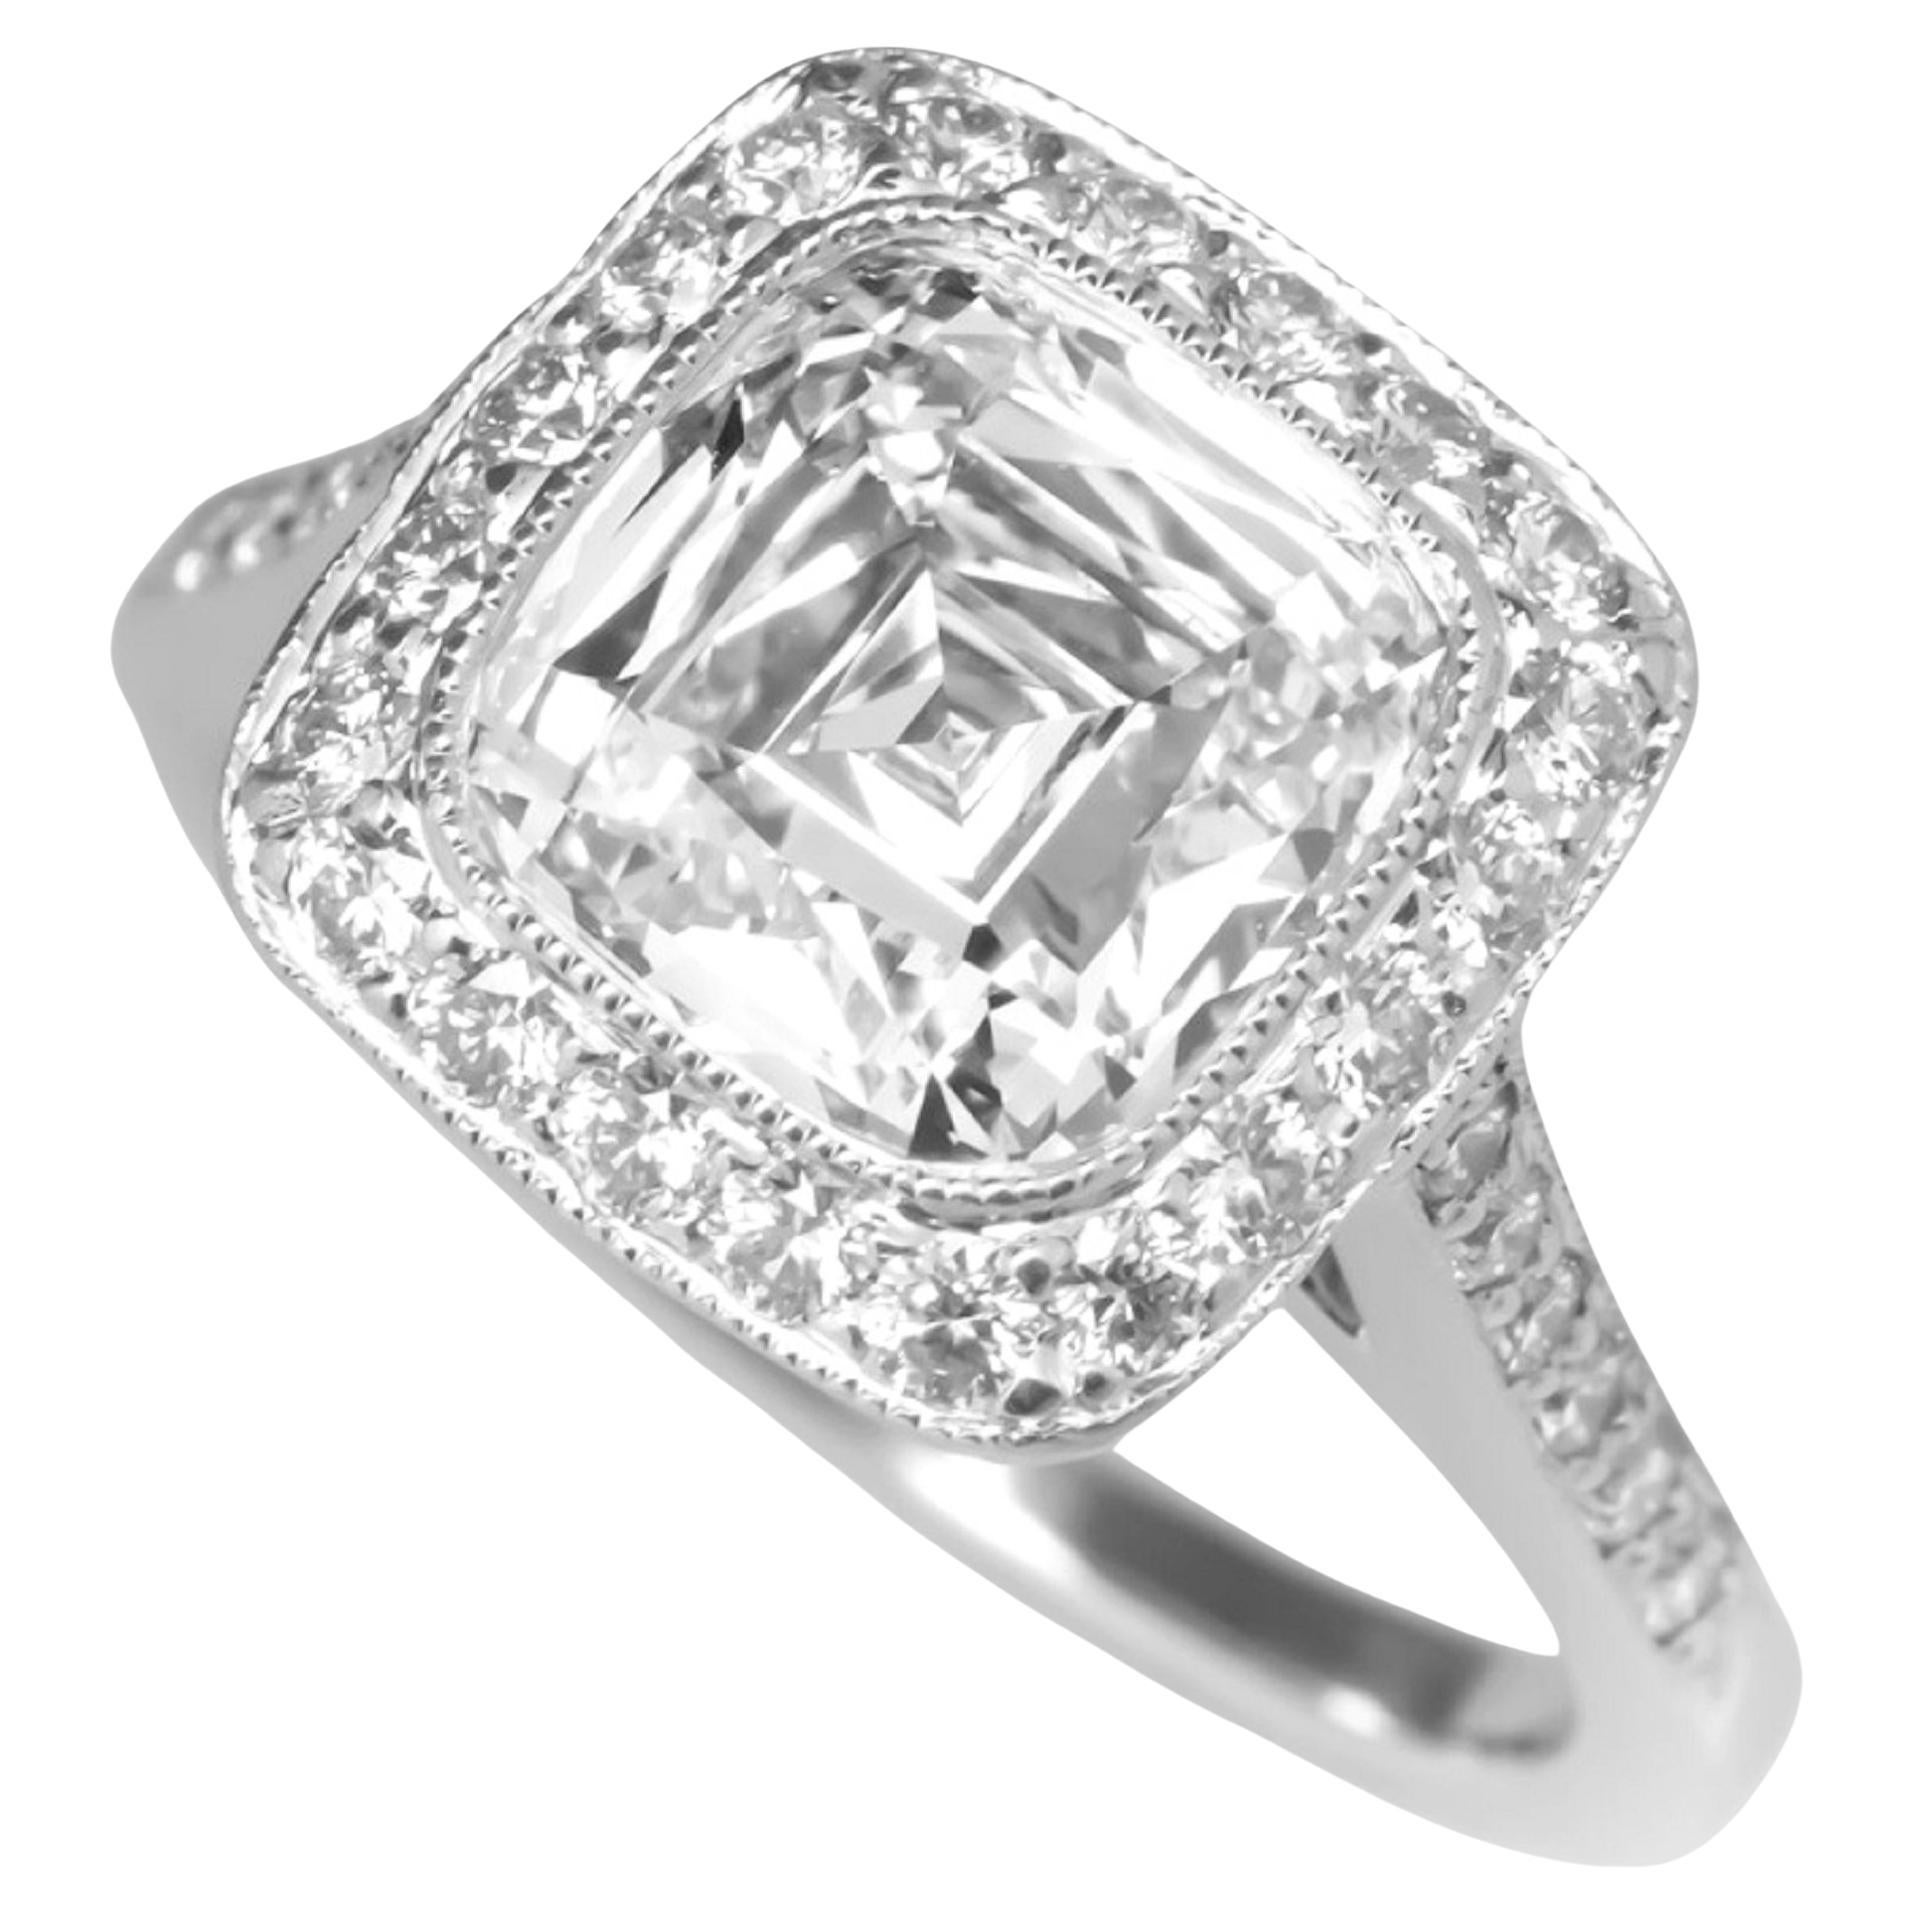 Tiffany & Co. 3.64 ct Total Weight Platinum Legacy Cushion Brilliant Cut Diamond Engagement Ring. 

The ring weighs 7.3 grams, size 5.75, the center stone is a Legacy Cushion Brilliant Cut diamond weighing 3.18 ct, F in Color, (IF) Internally